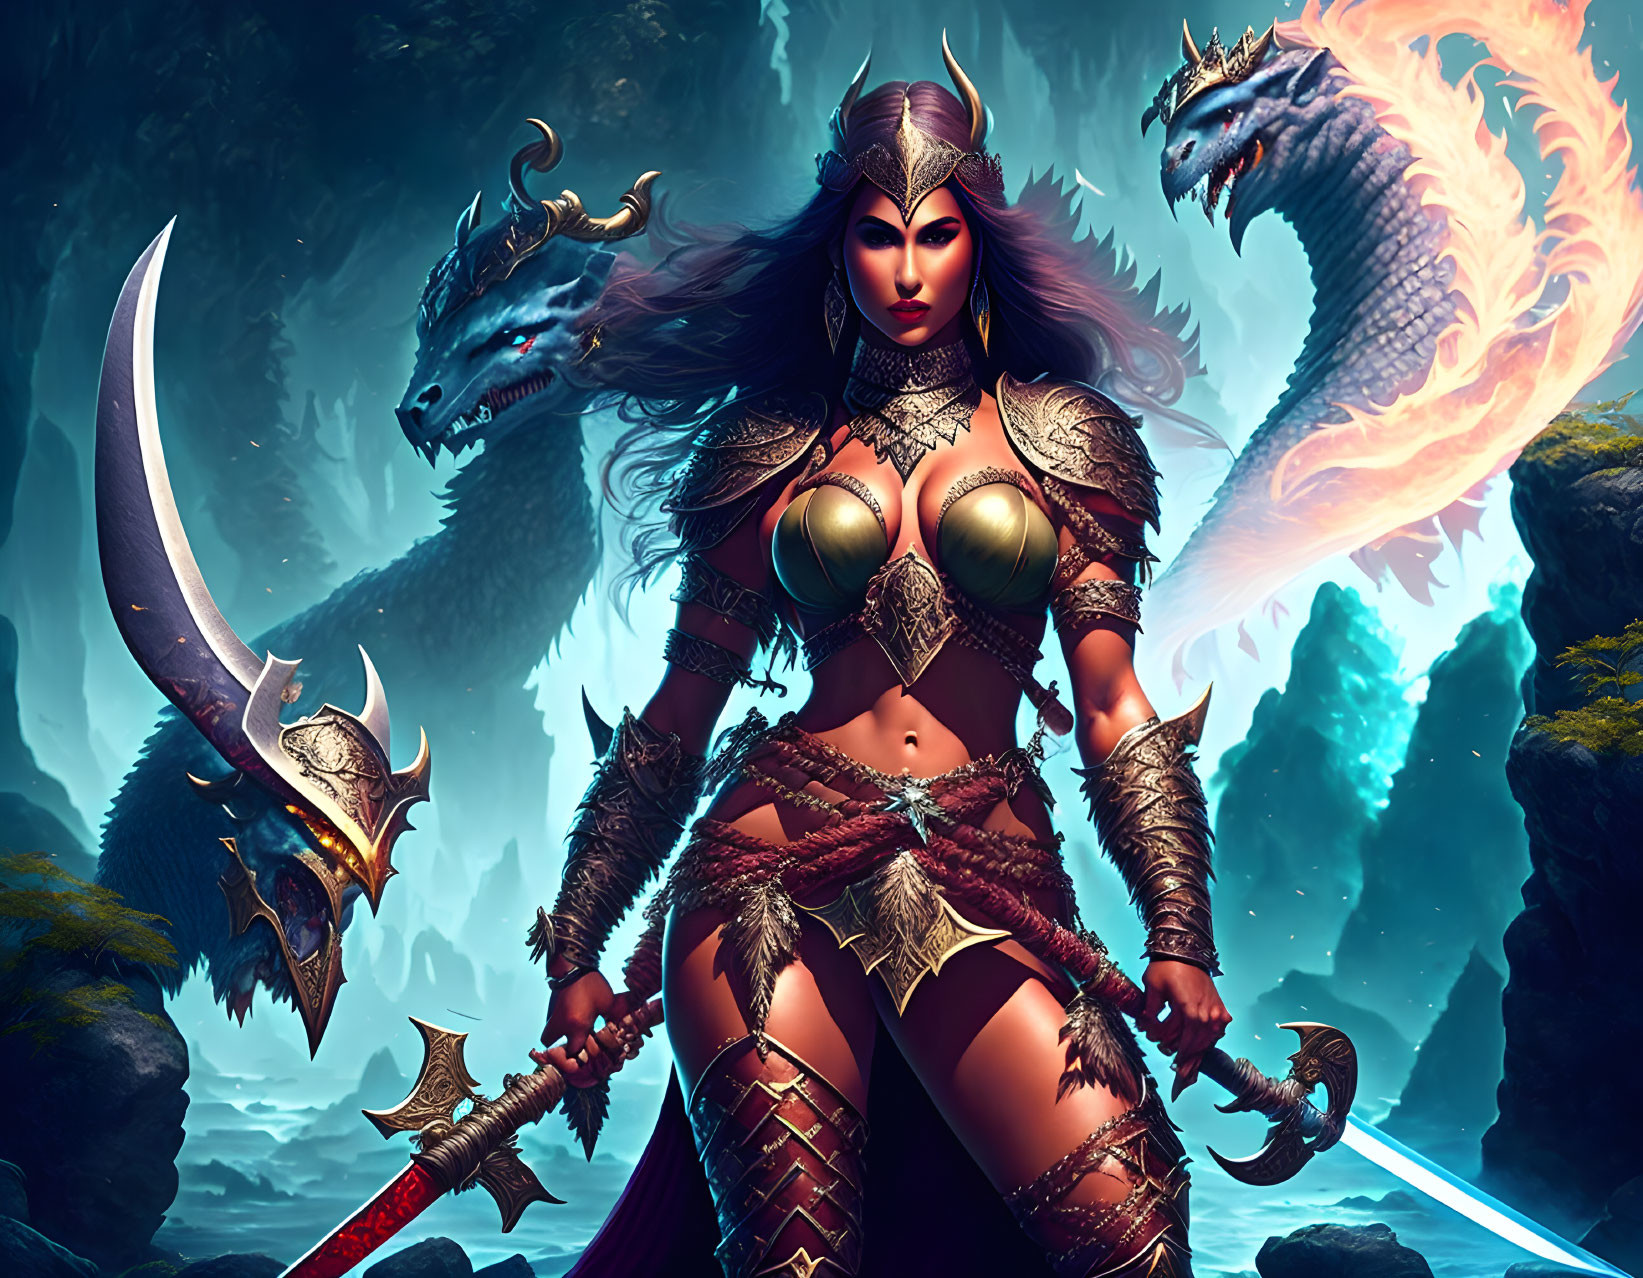 Fantasy warrior woman with dragons in mystical landscape